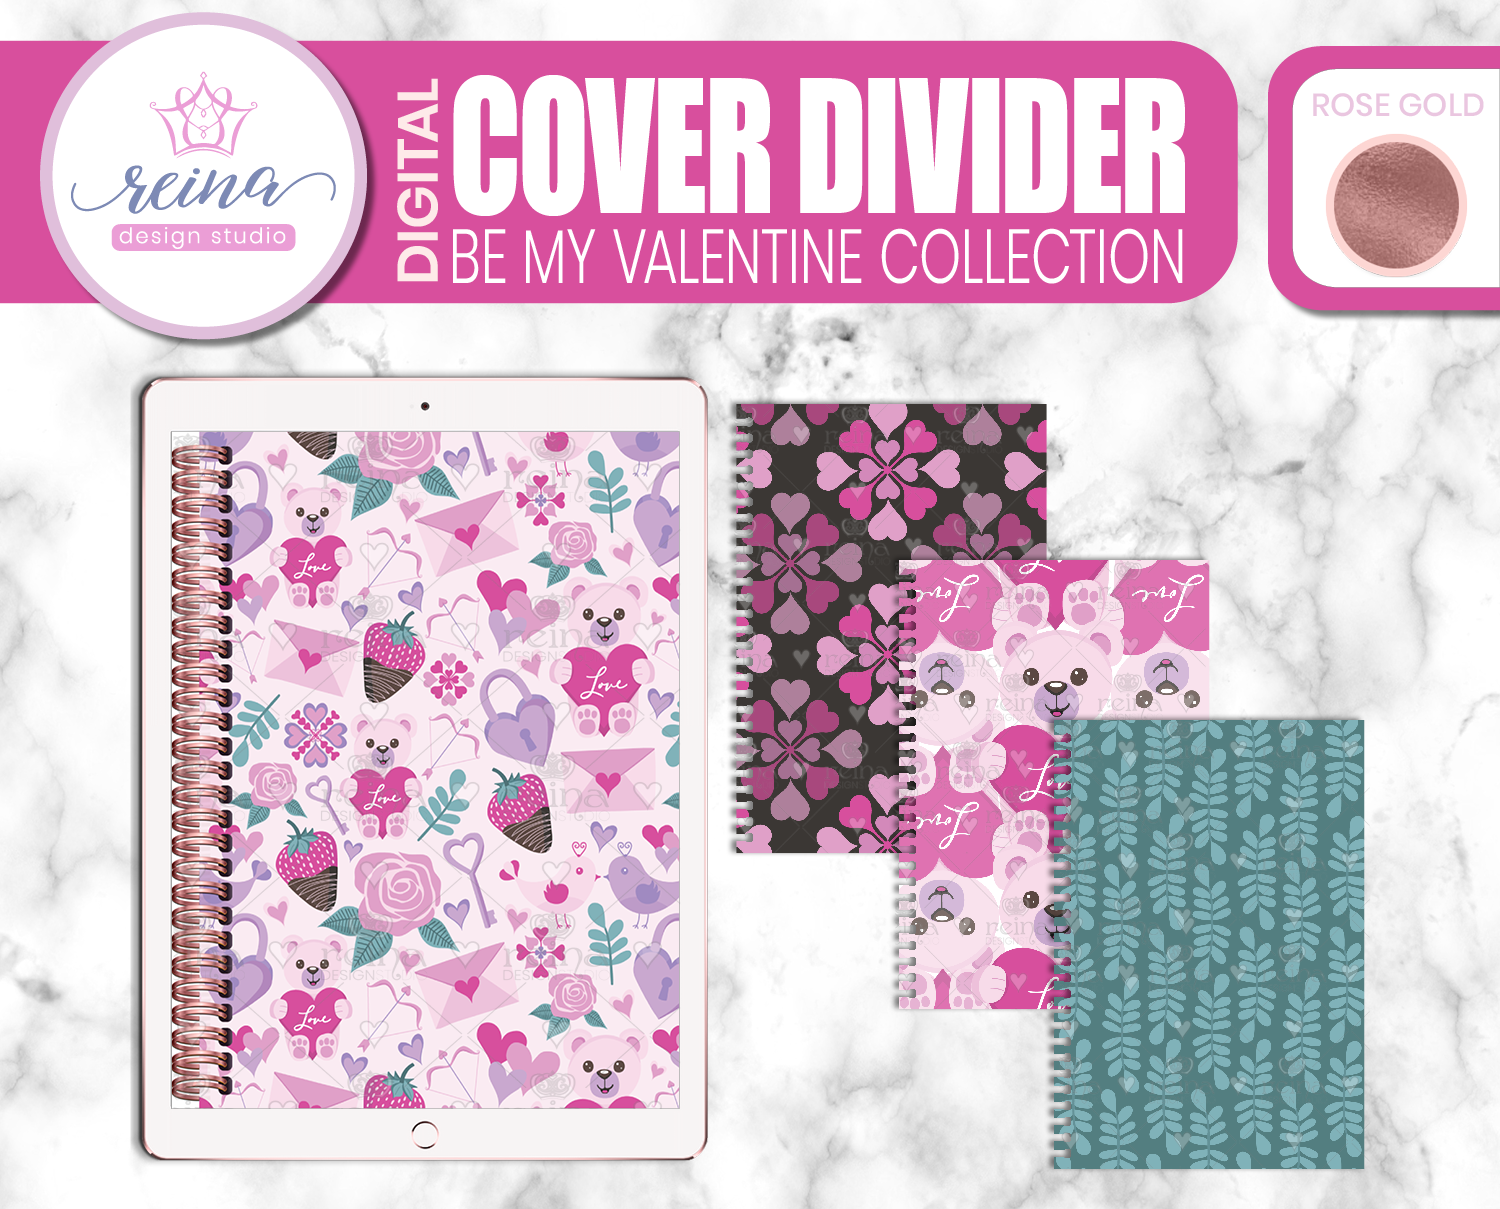 Interchangeable Digital Planner Cover and Dividers Deluxe | Be My Valentine Set A, Rose Gold